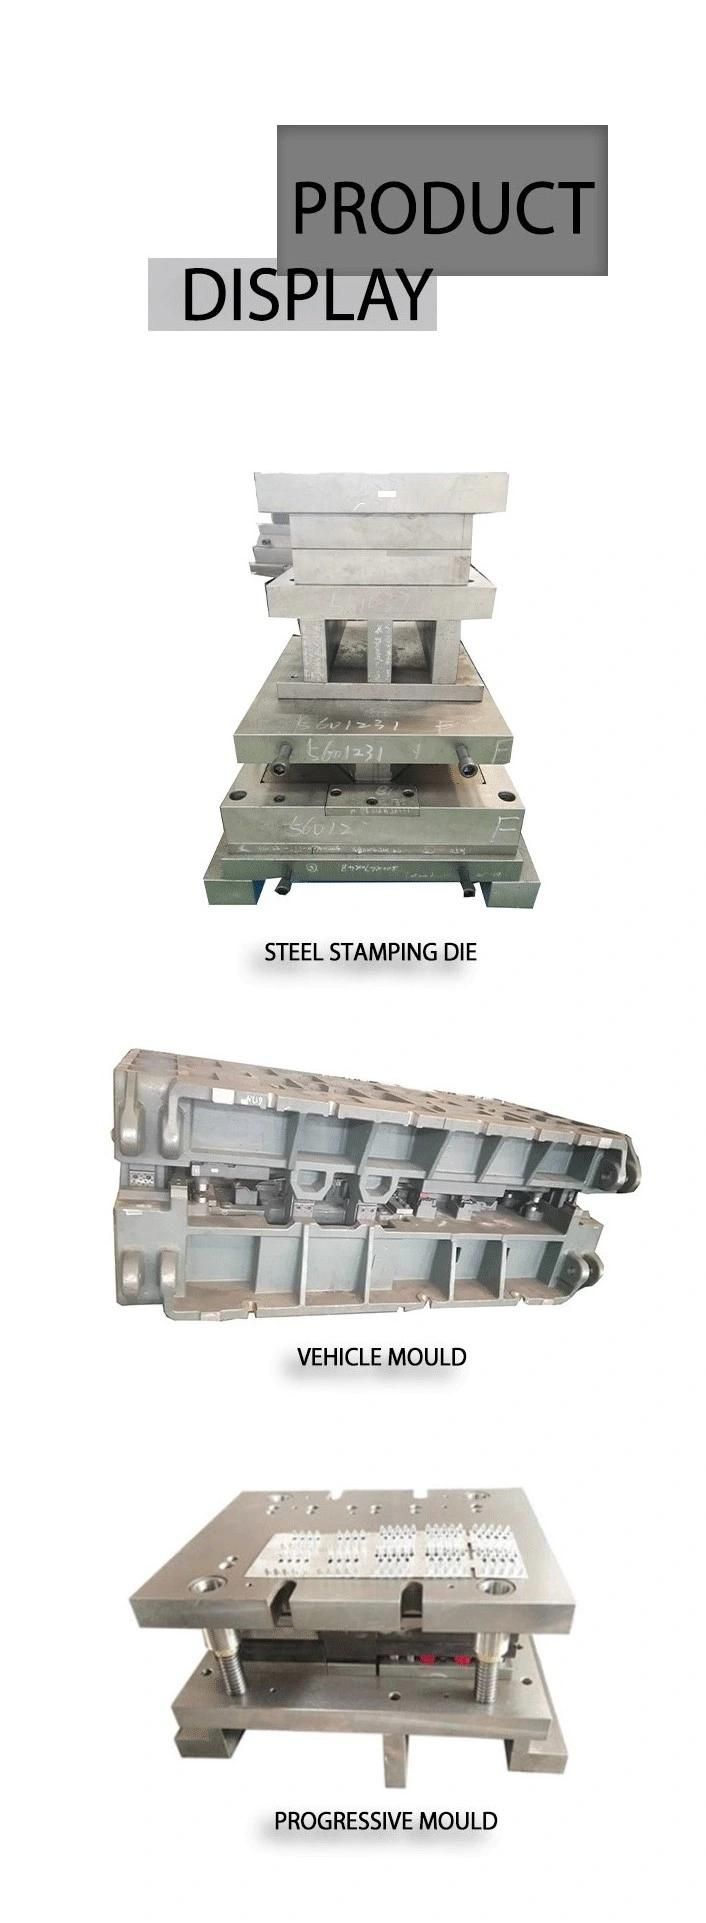 China Ductile / Gray Iron Stand Foundation Plate Drilling Machine Tool CNC Gantry Double Column Milling Machine Base Bed Casting Parts